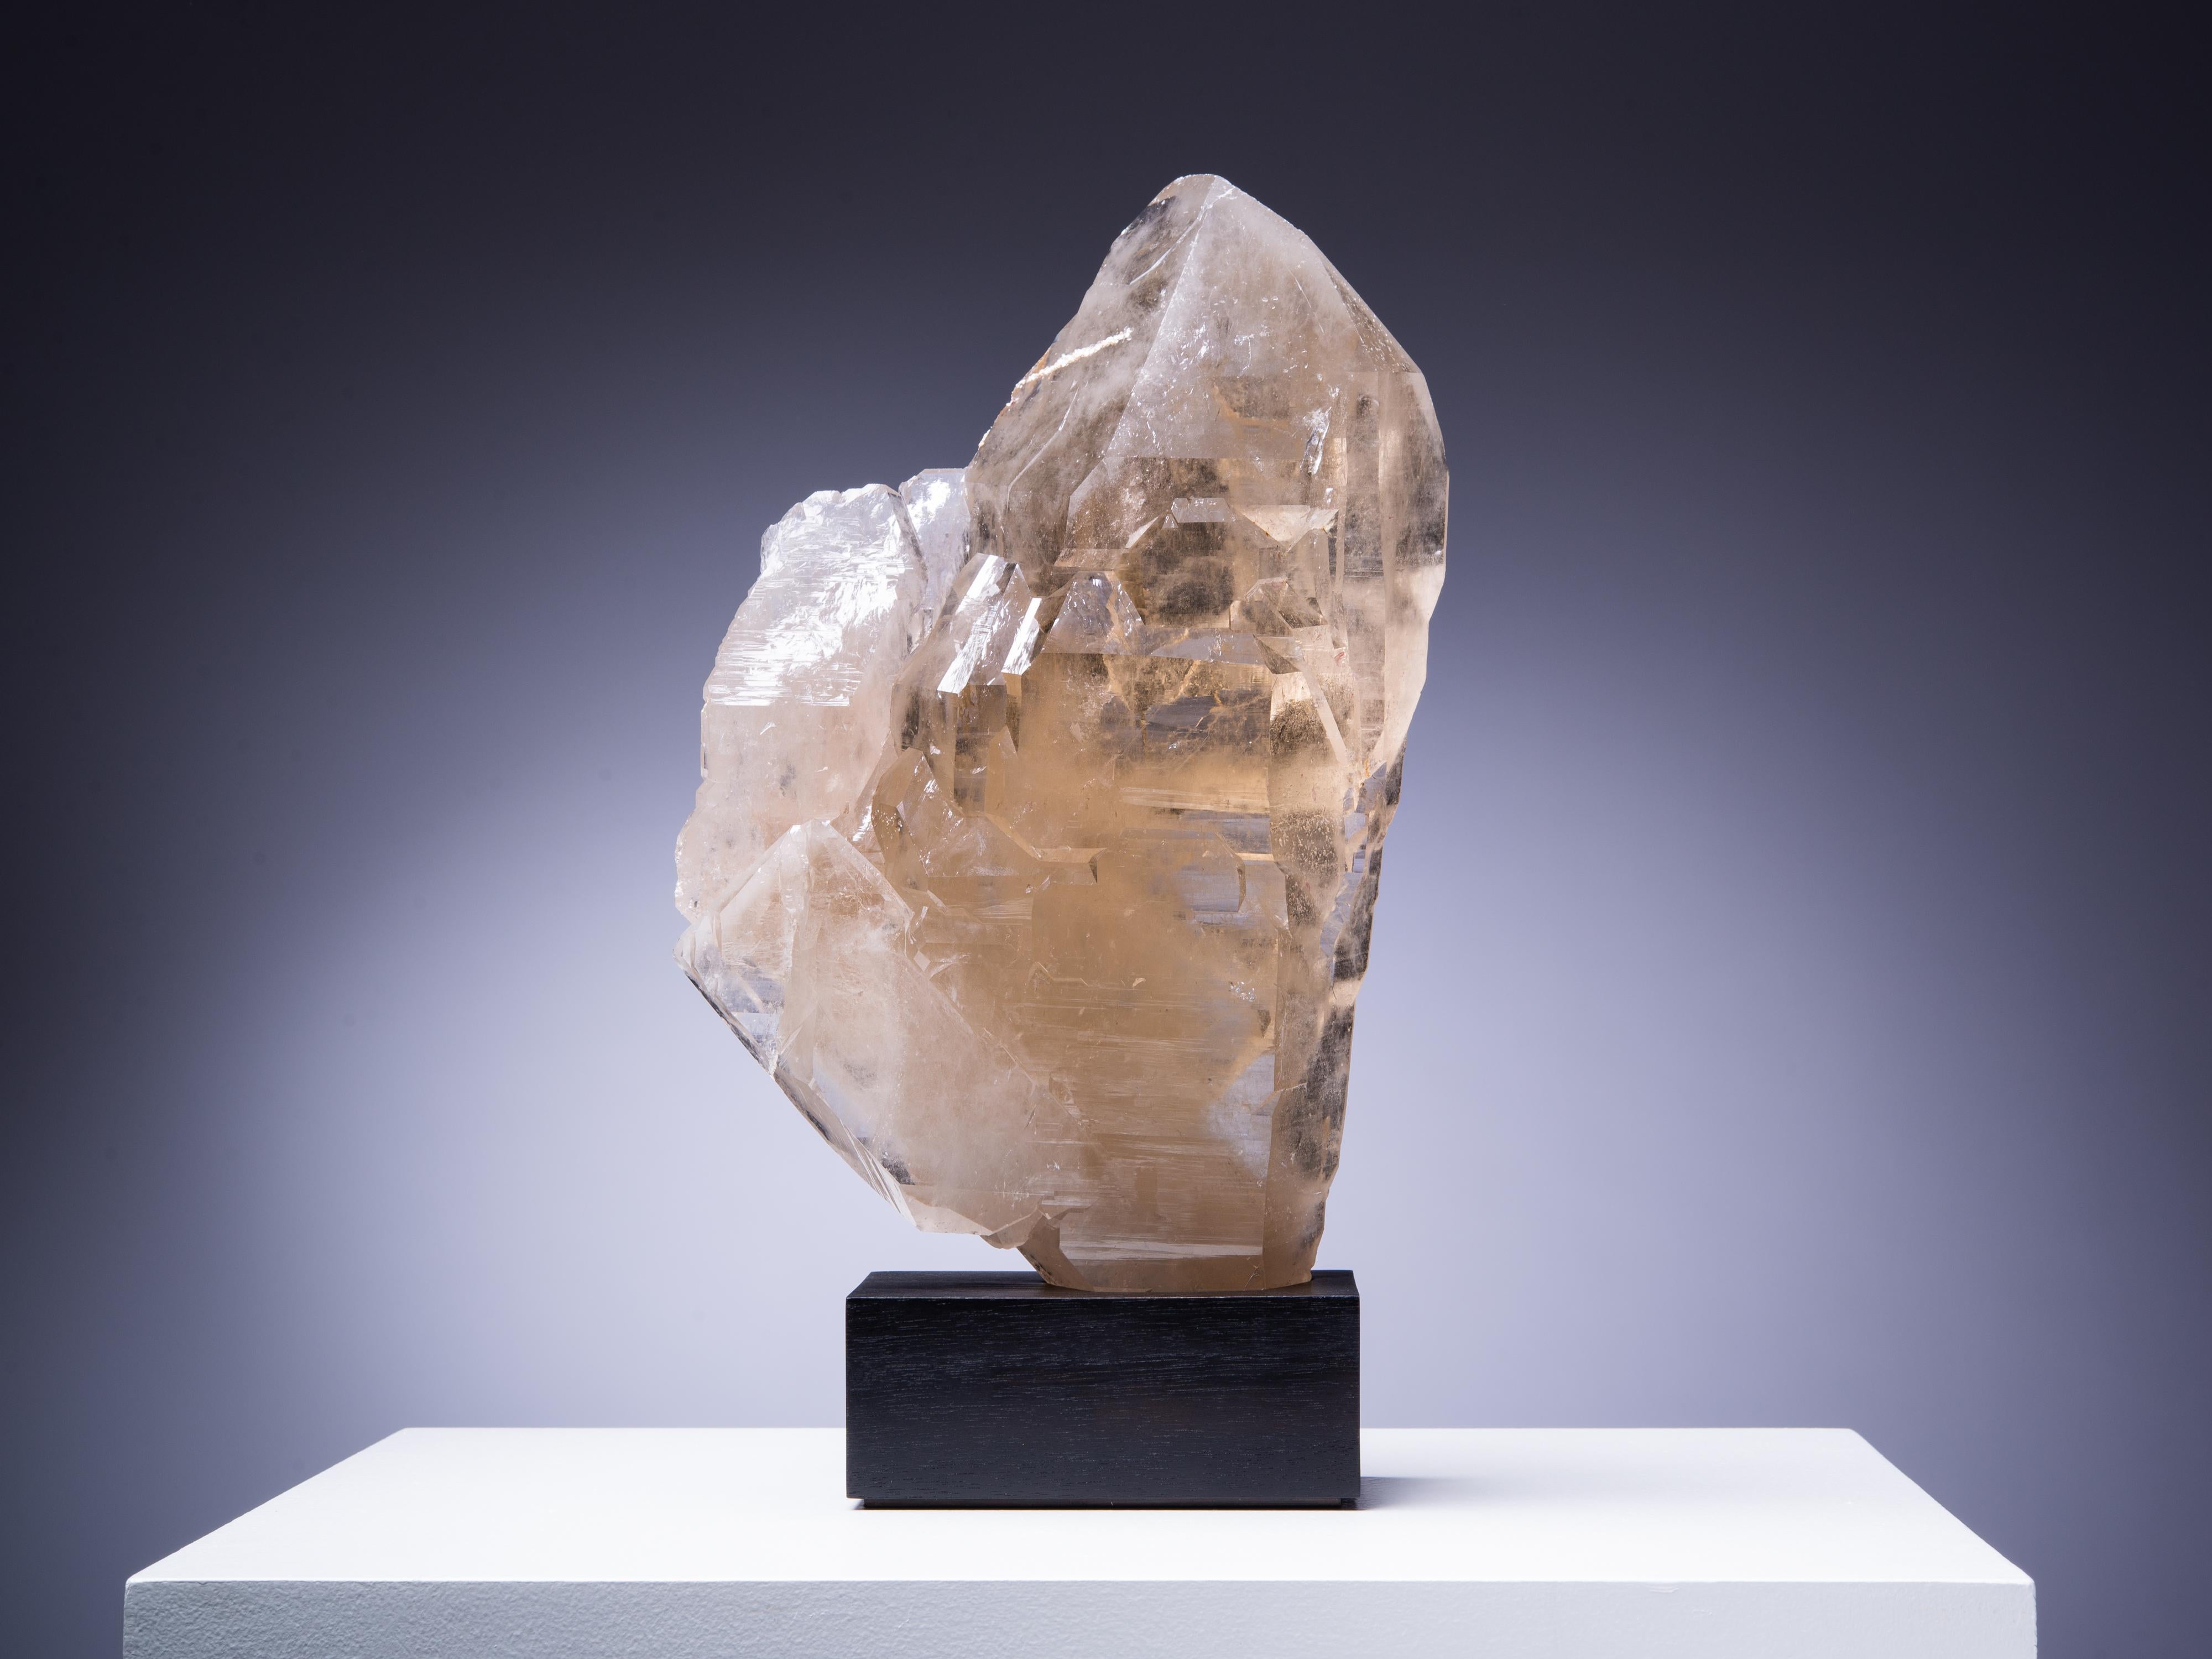 A wonderful large formation of smokey quartz, unpolished and with all its
natural lustre, the piece is wonderfully sculptural in quality.

This piece was legally and ethically sourced.

Place of origin: Brazil.